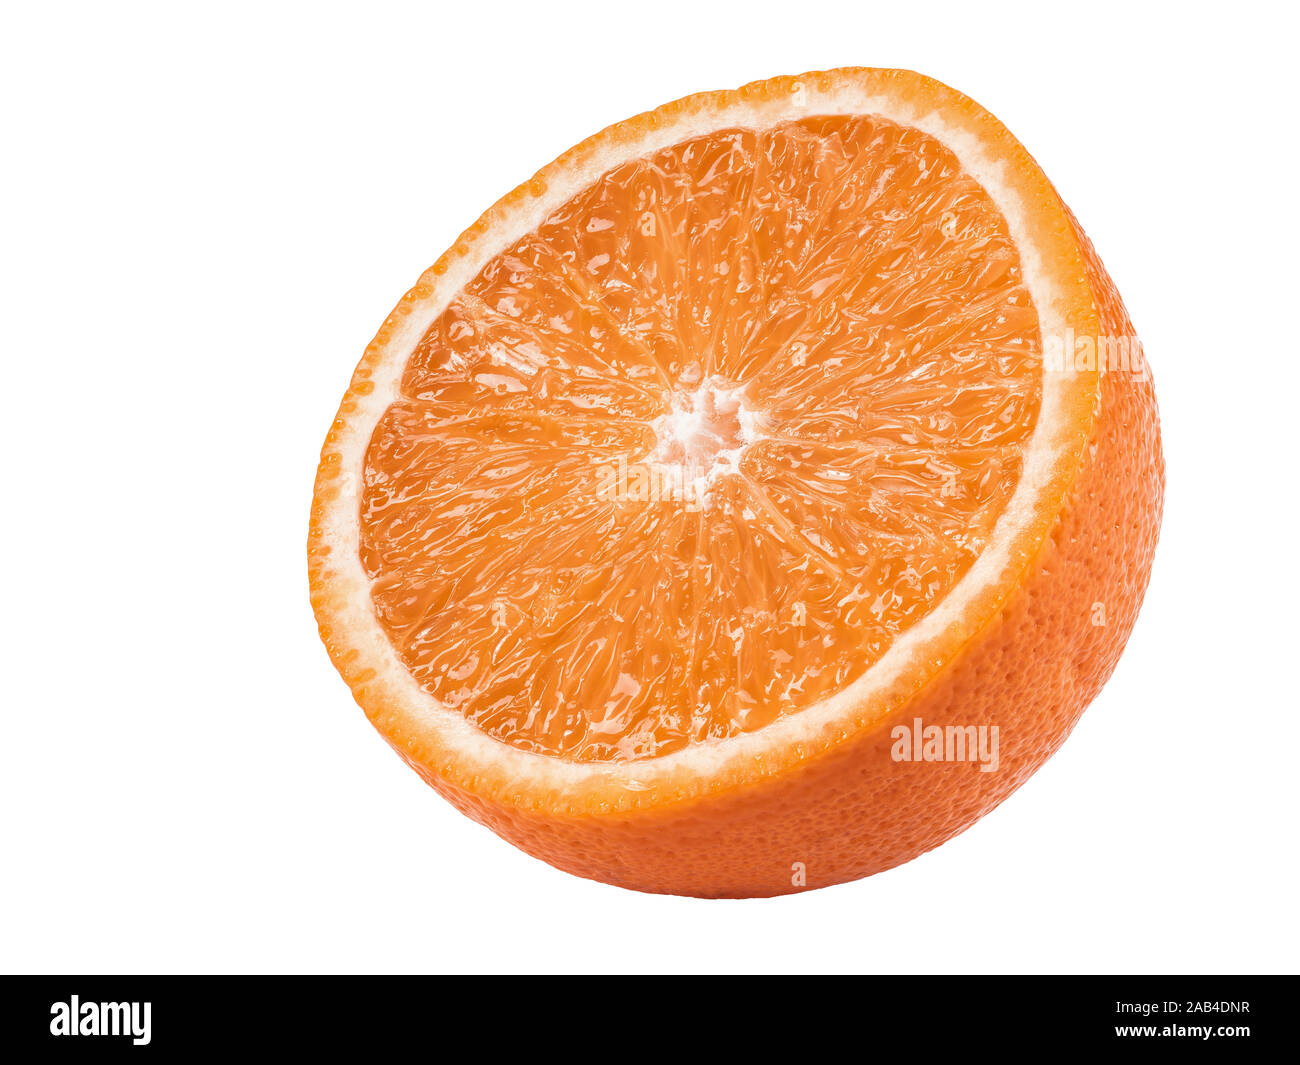 Half of a ripe orange isolated on white background with copy space for text or images. Fruit with juicy flesh. Side view. Close-up shot. Stock Photo